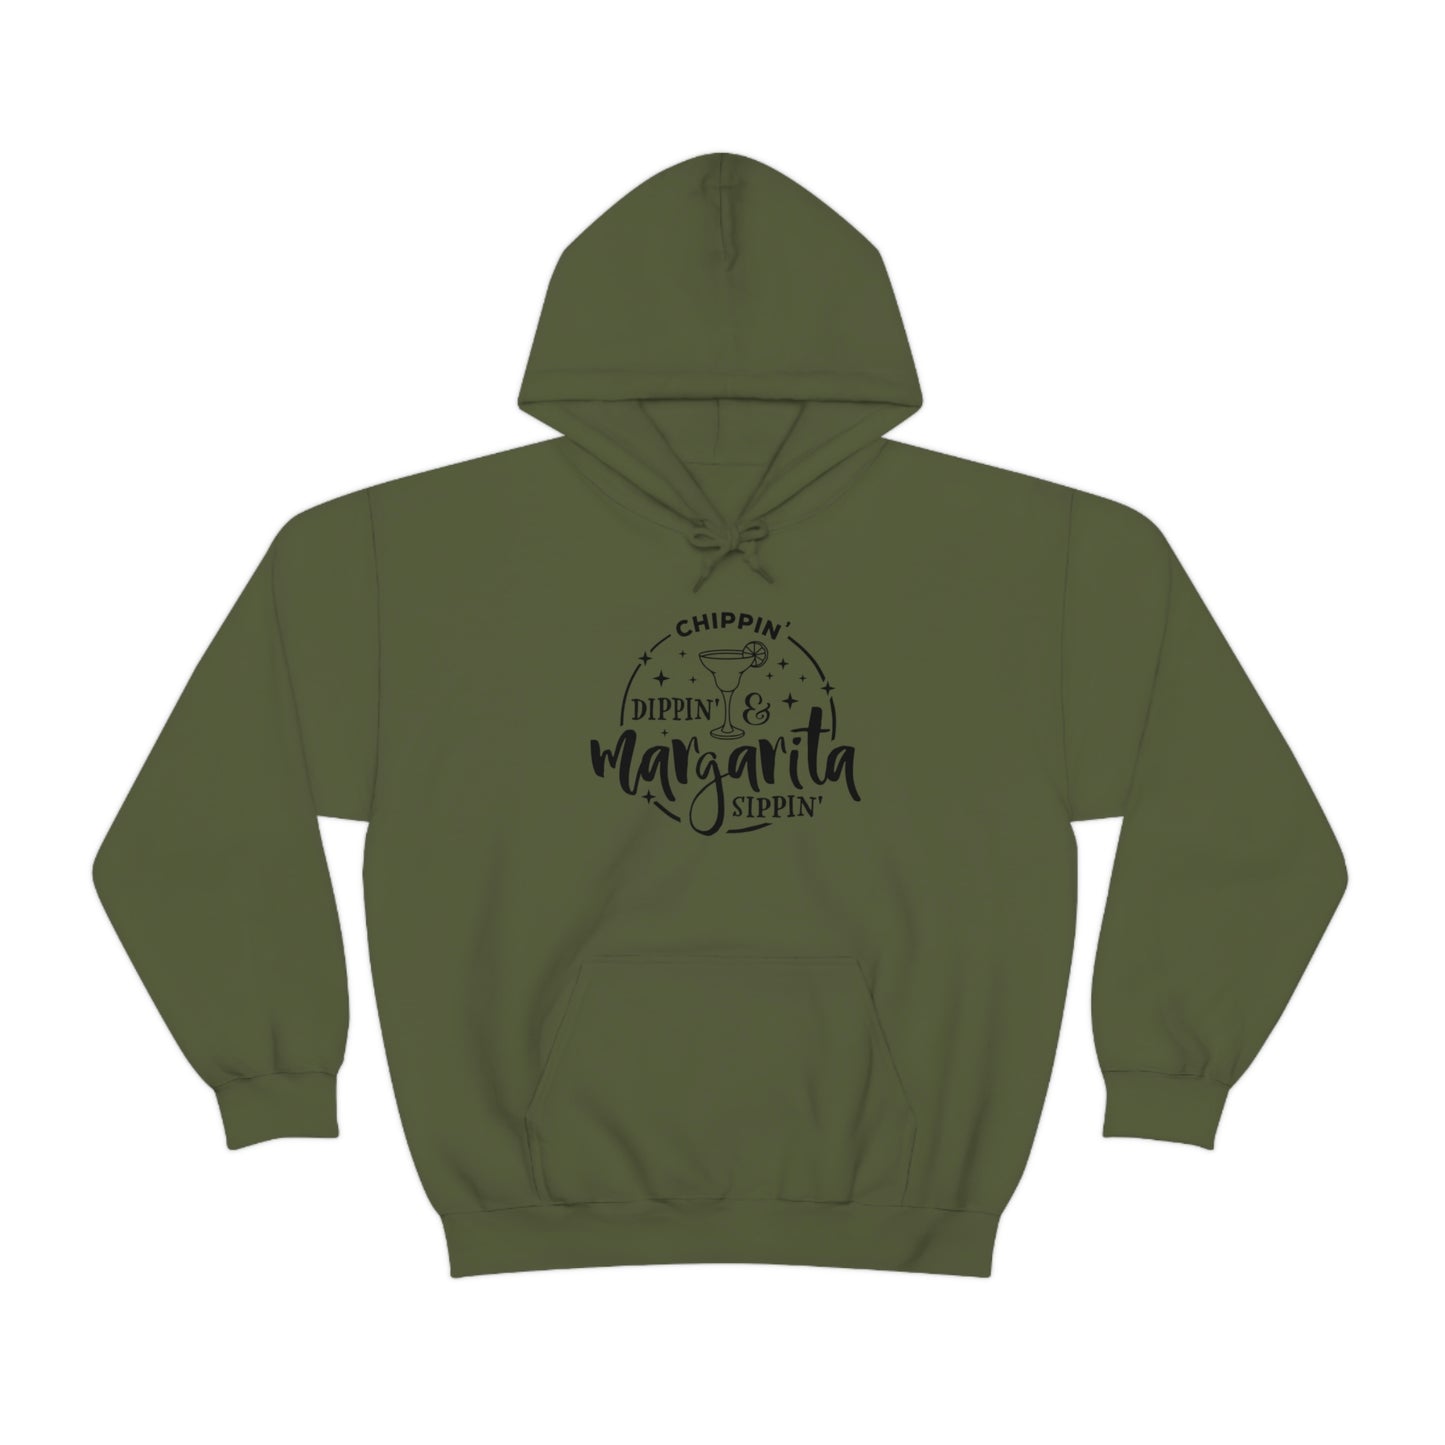 "Chippin, Dippin, and Margarita Sippin" Unisex Heavy Blend™ Hooded Sweatshirt